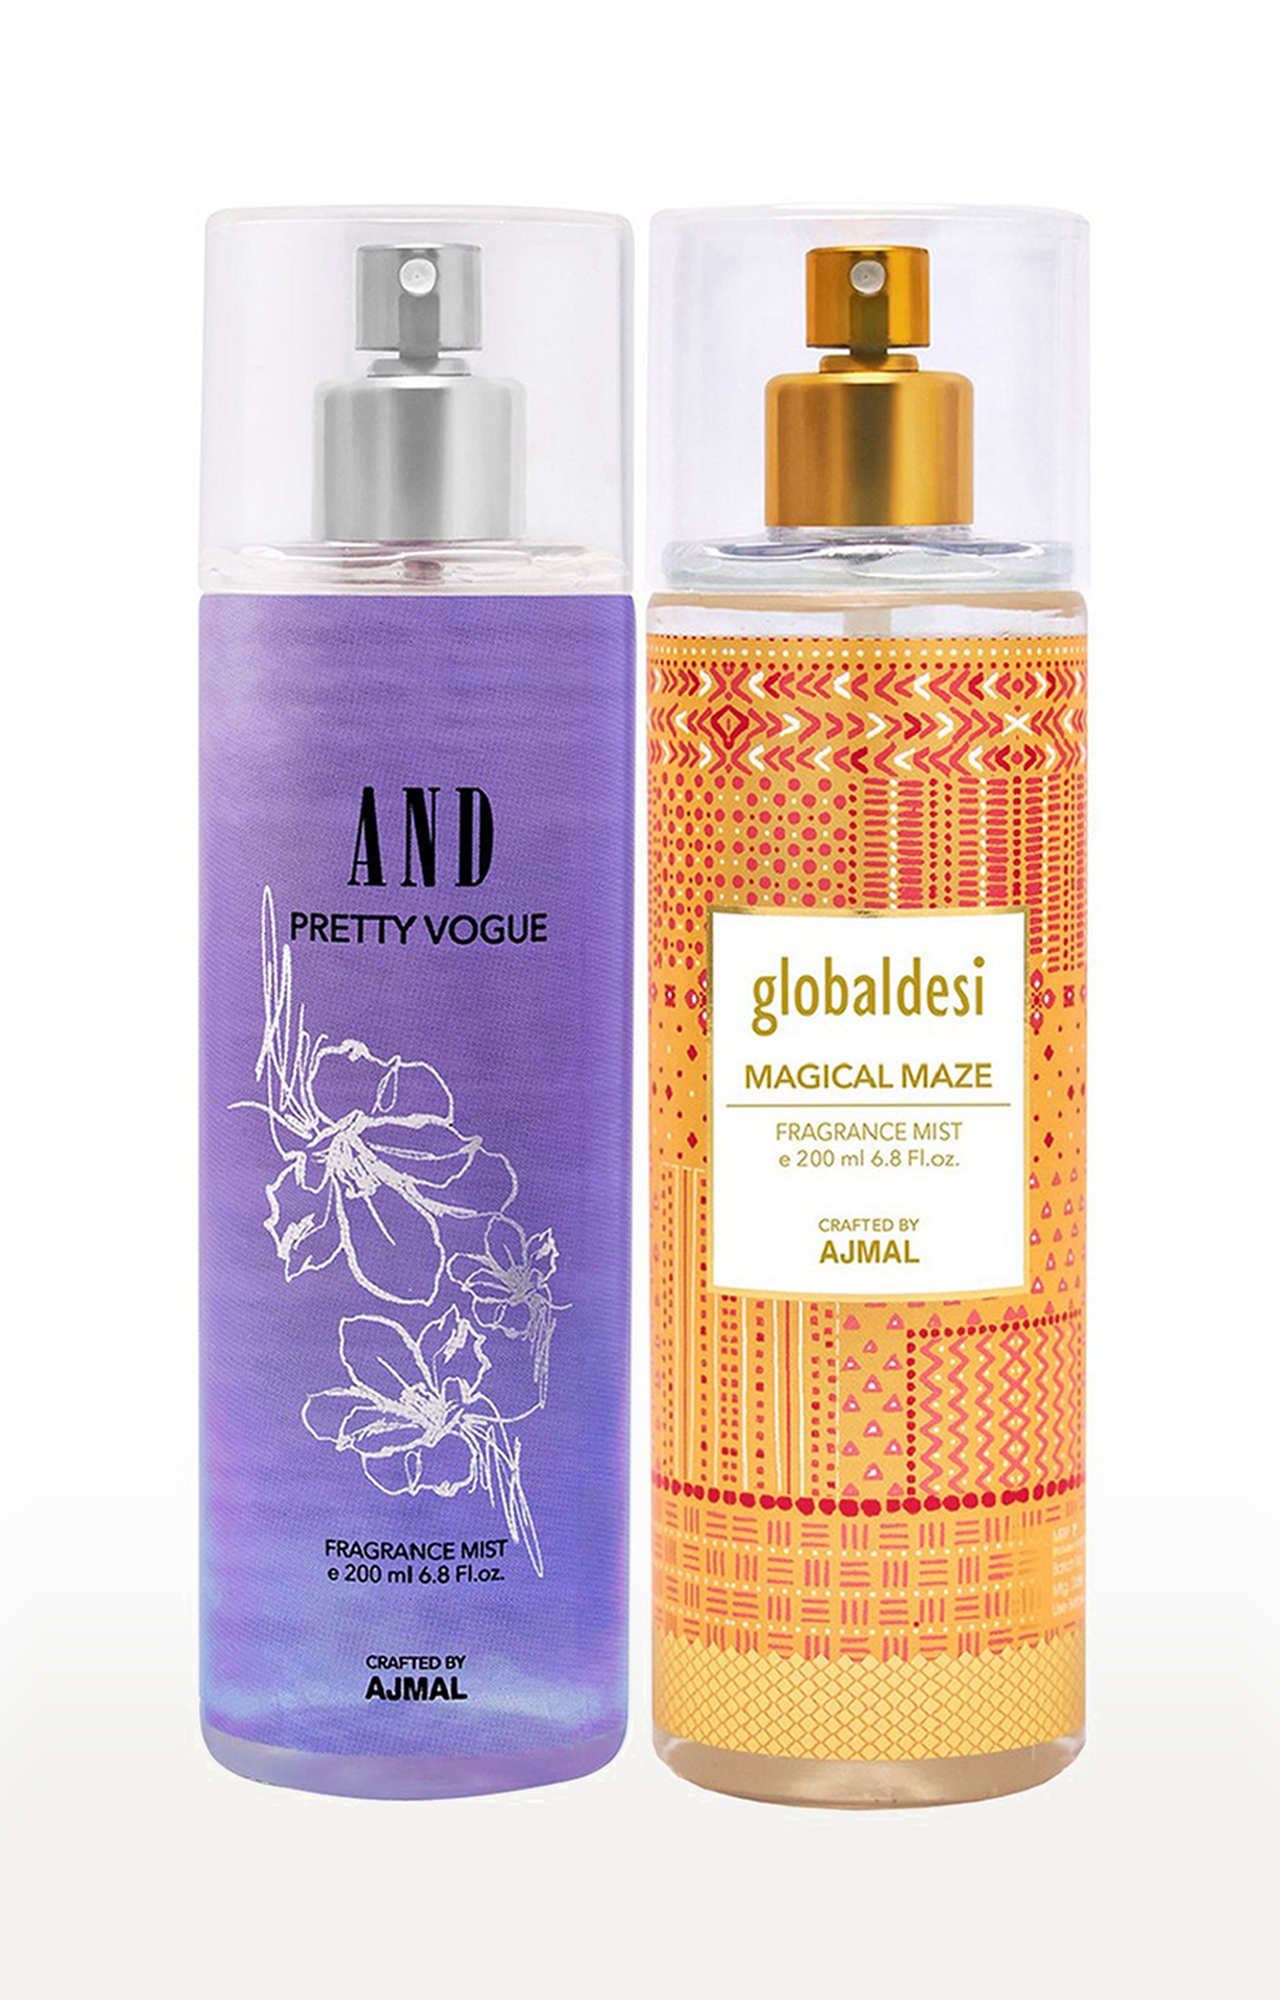 AND Pretty Vogue Body Mist 200ML & Global Desi Magical Maze Body Mist 200ML Long Lasting Scent Spray Gift For Women Perfume FREE